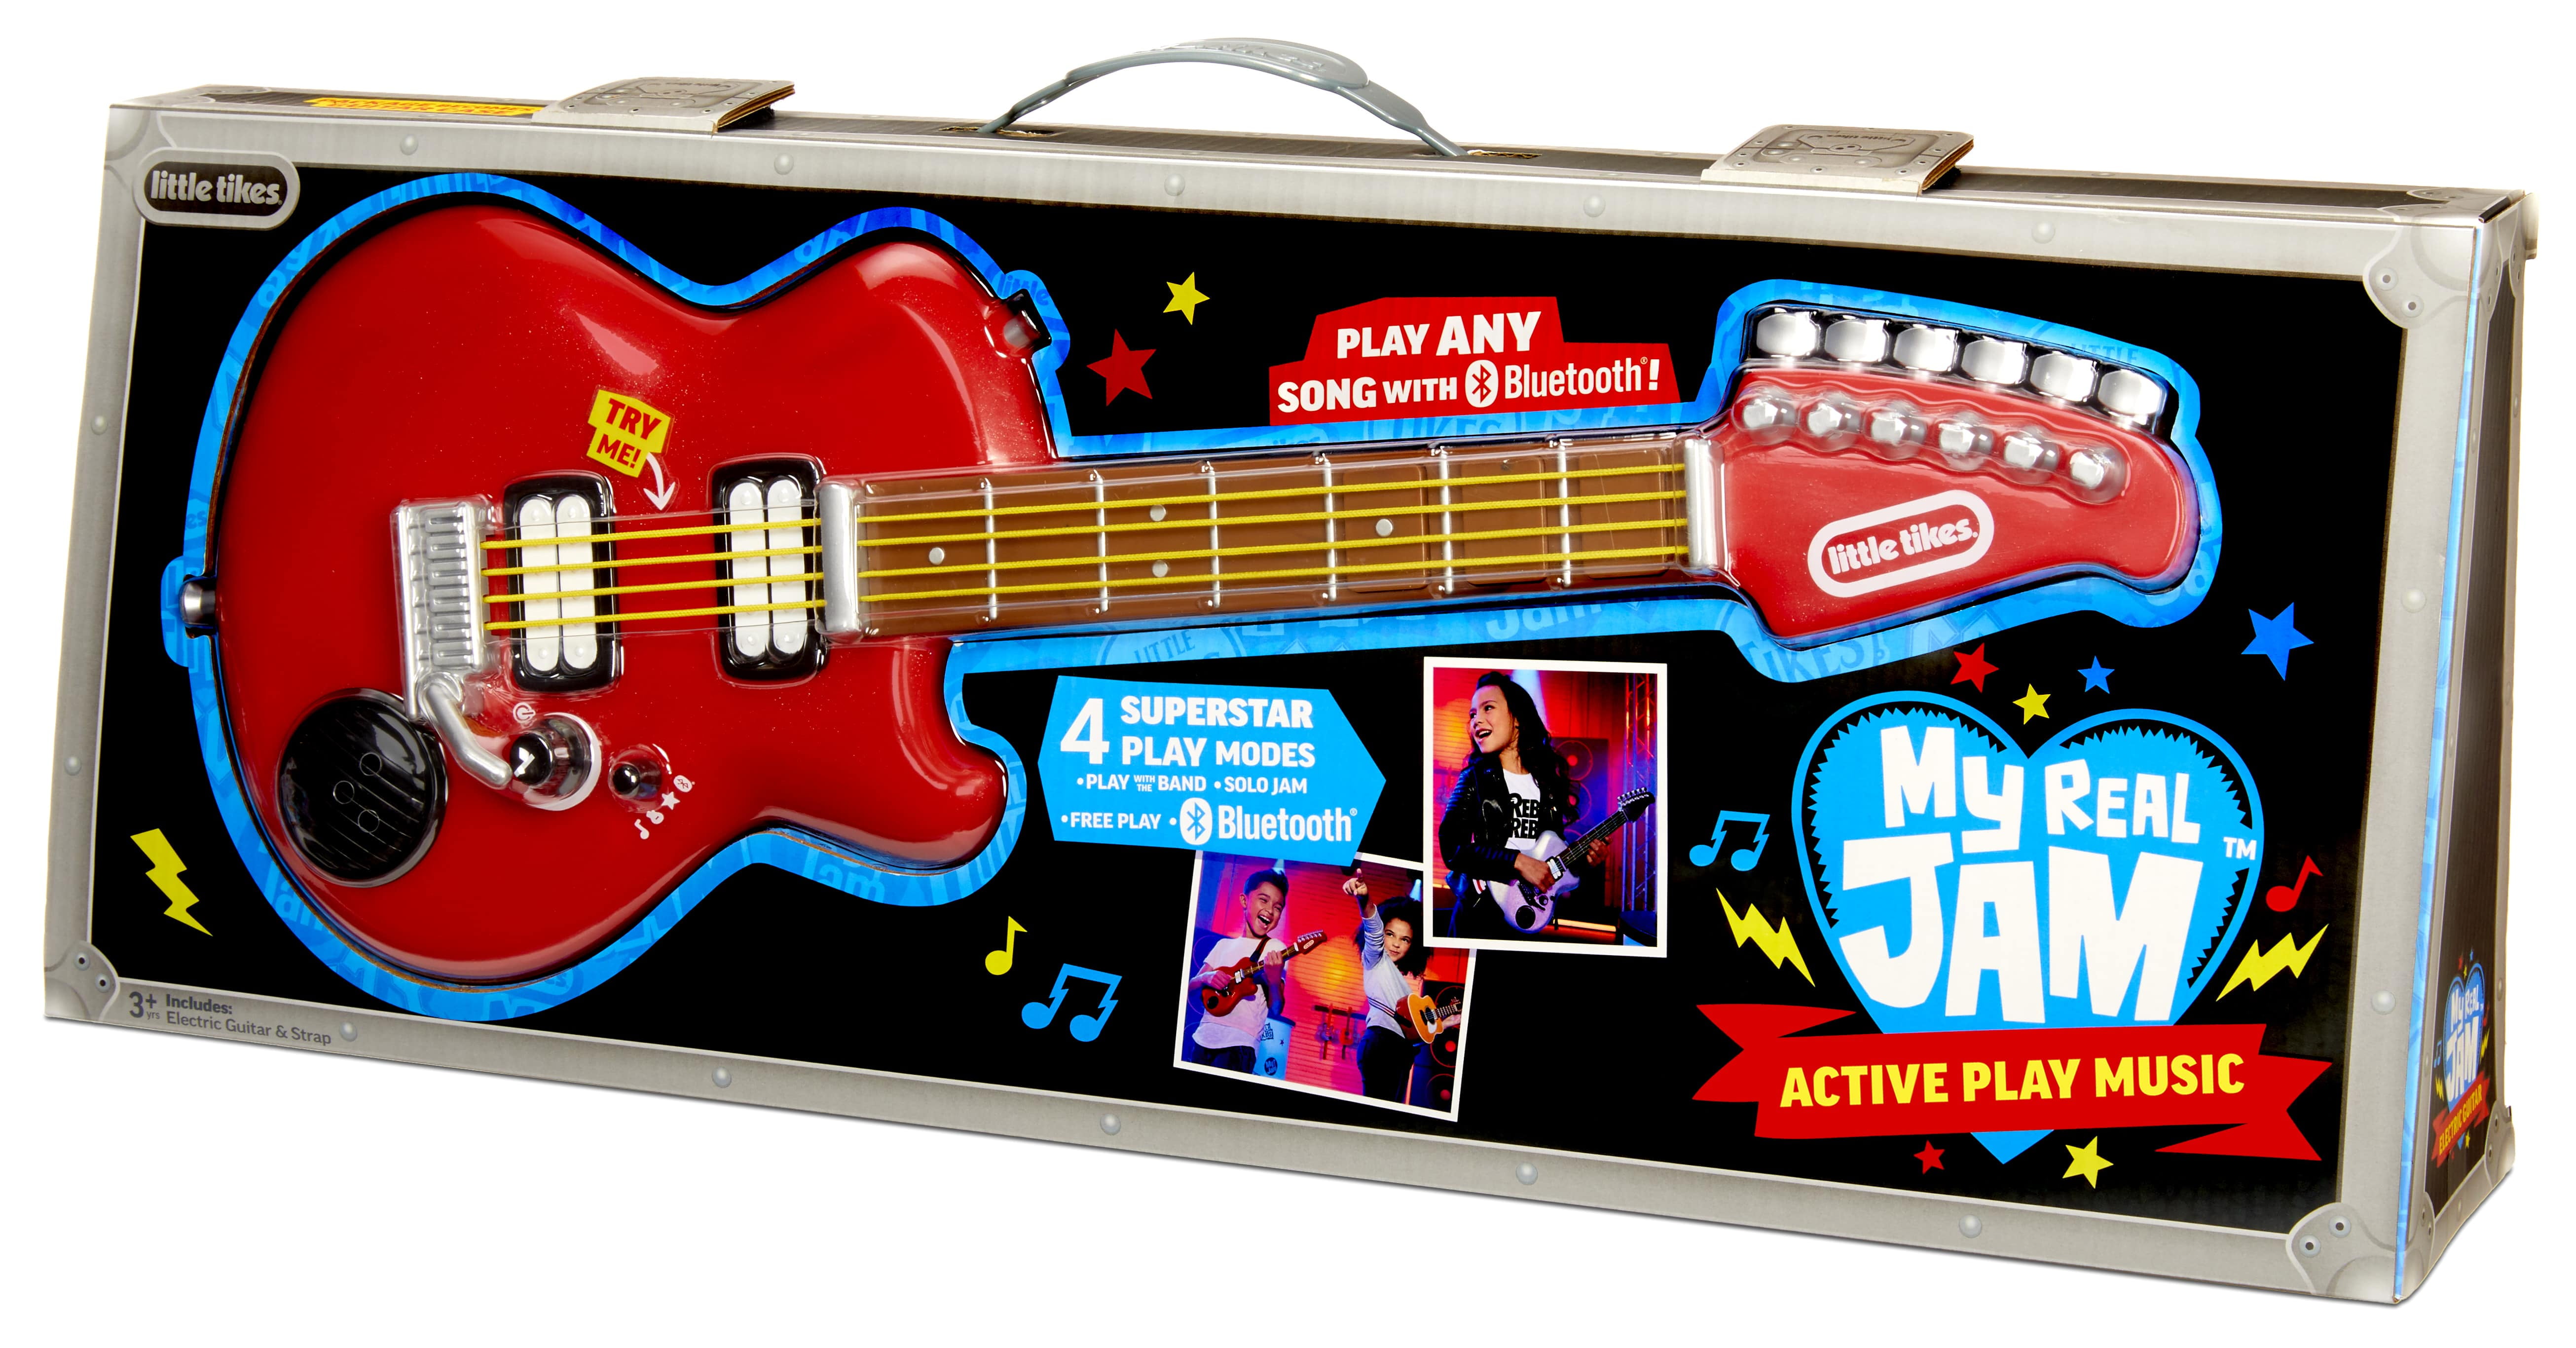 Little Tikes My Real Jam Electric Guitar, Toy Guitar with Strap 